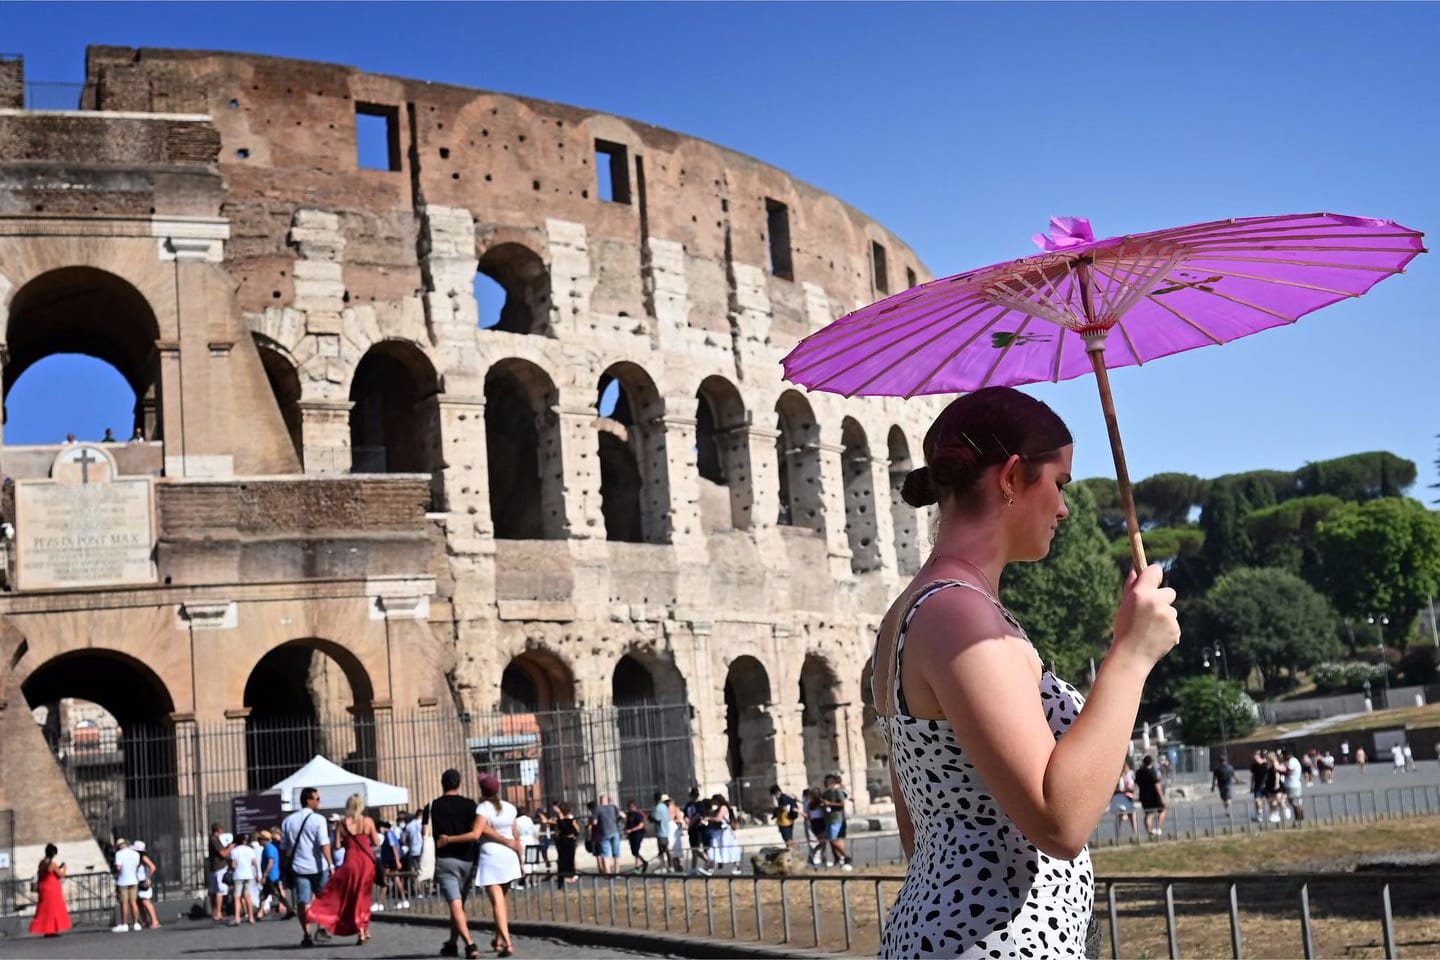 A woman used an umbrella to shield herself from the sun outside the Colosseum in Rome Thursday. Rome was among 15 Italian cities that received warnings from the health ministry about high temperatures and humidity with peaks predicted for Friday.